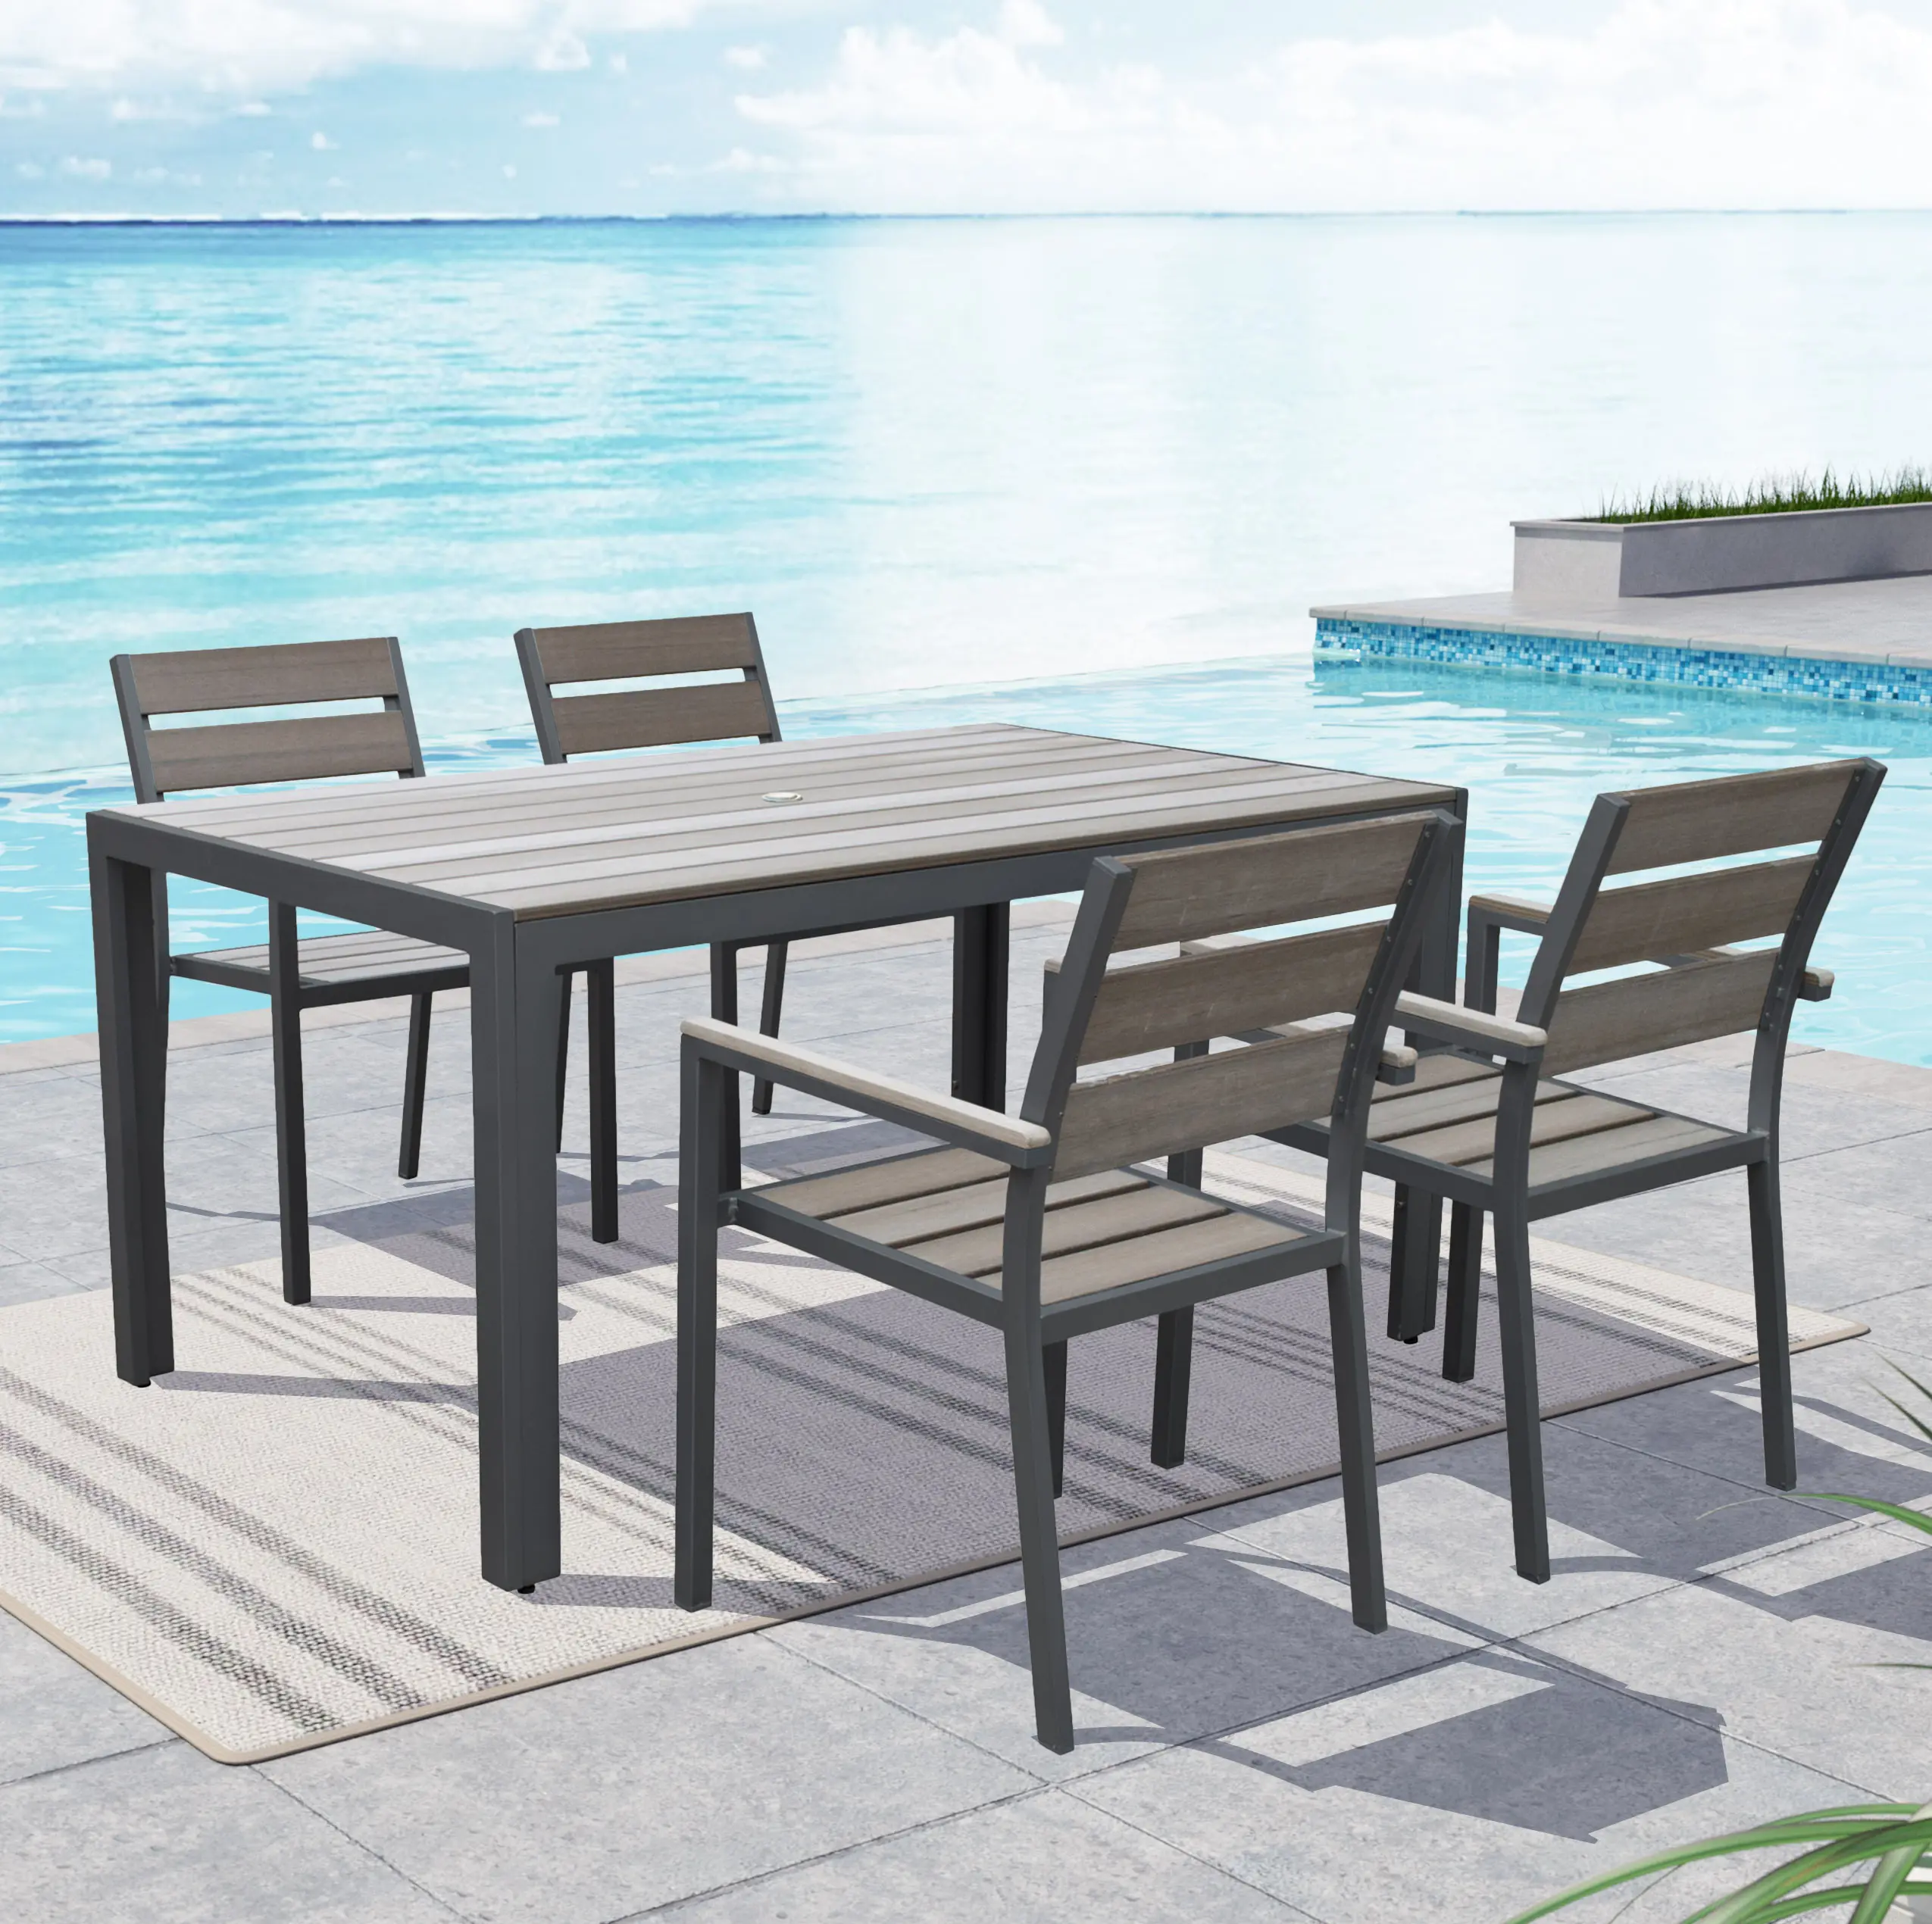 Gallant Sun Bleached Black Outdoor Dining Chairs, Set of 4